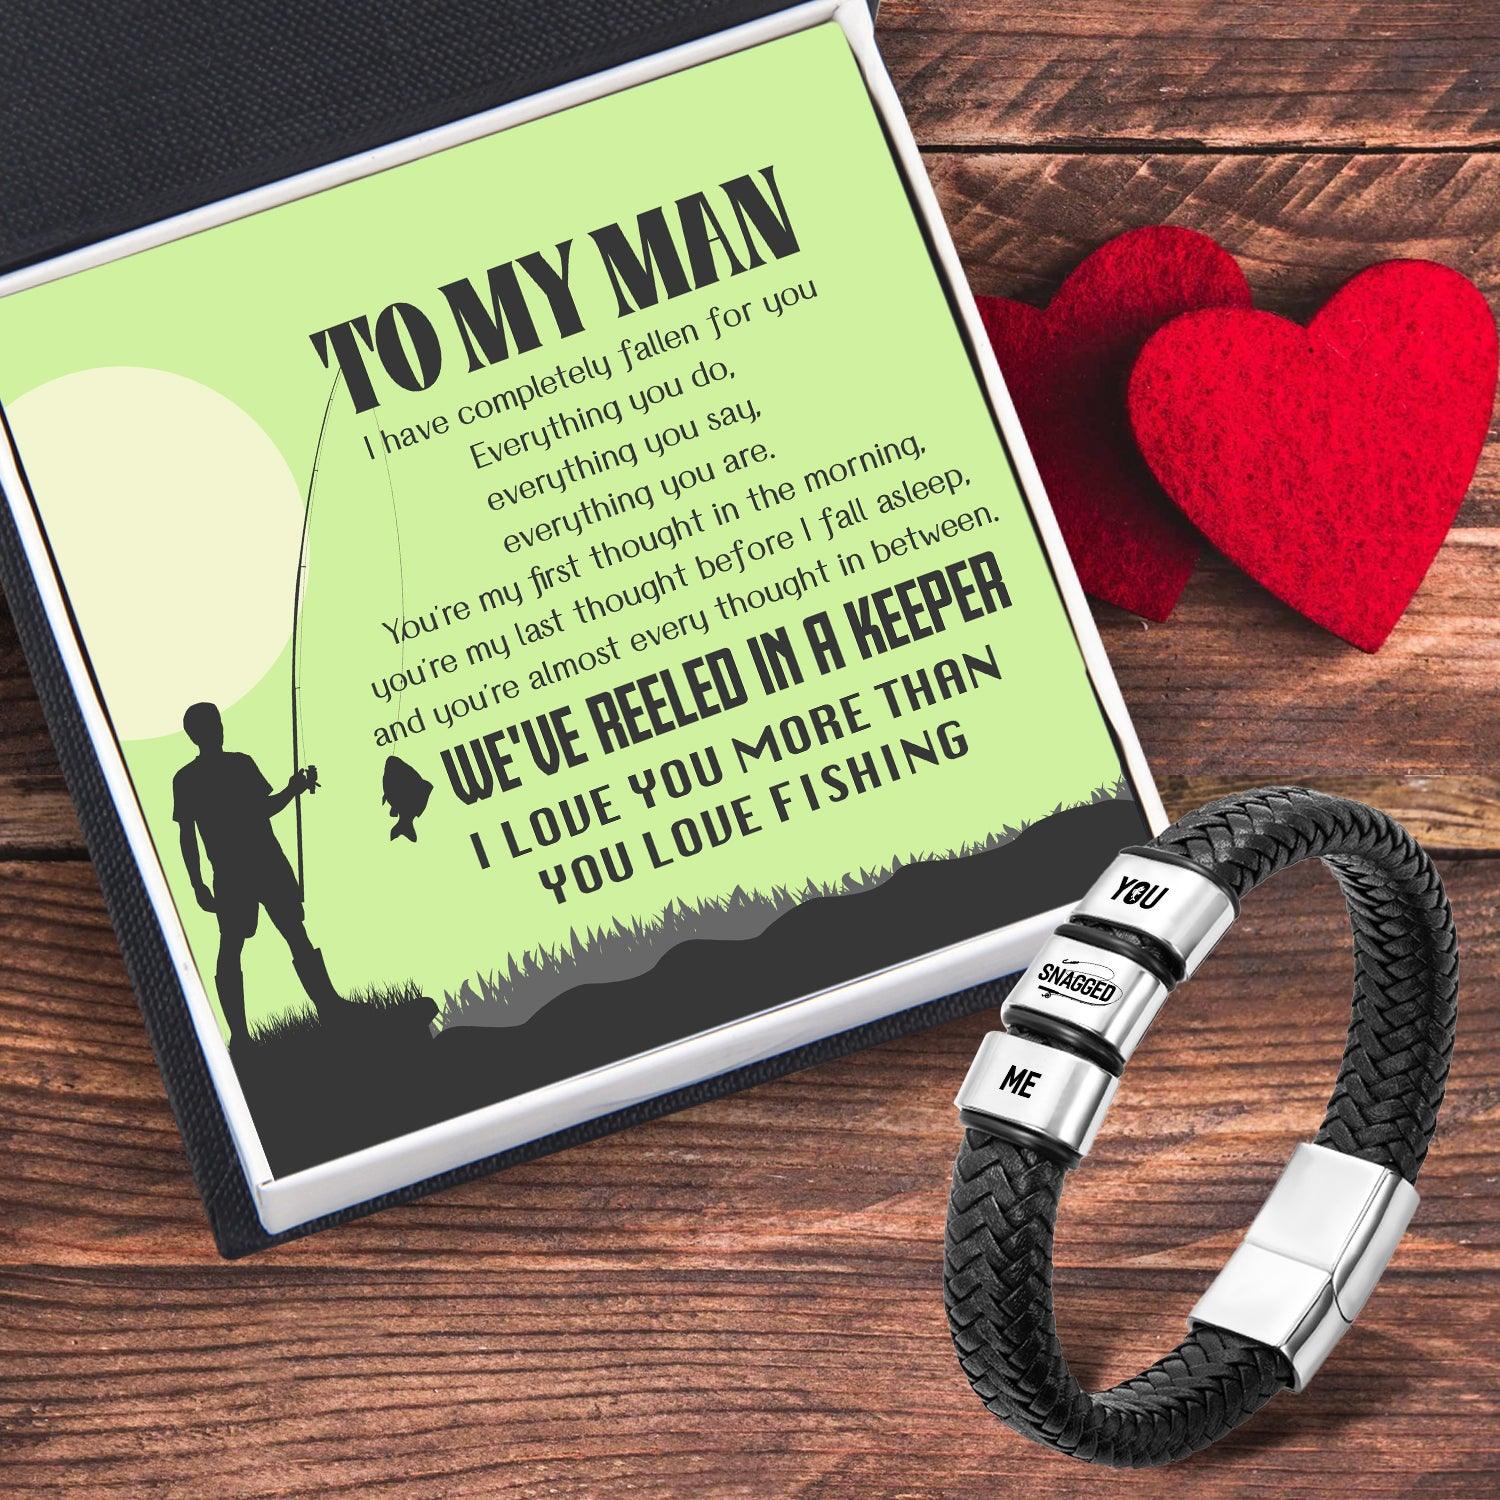 Leather Bracelet - Fishing - To My Man - I Love You More Than You Love Fishing - Augbzl26036 - Gifts Holder